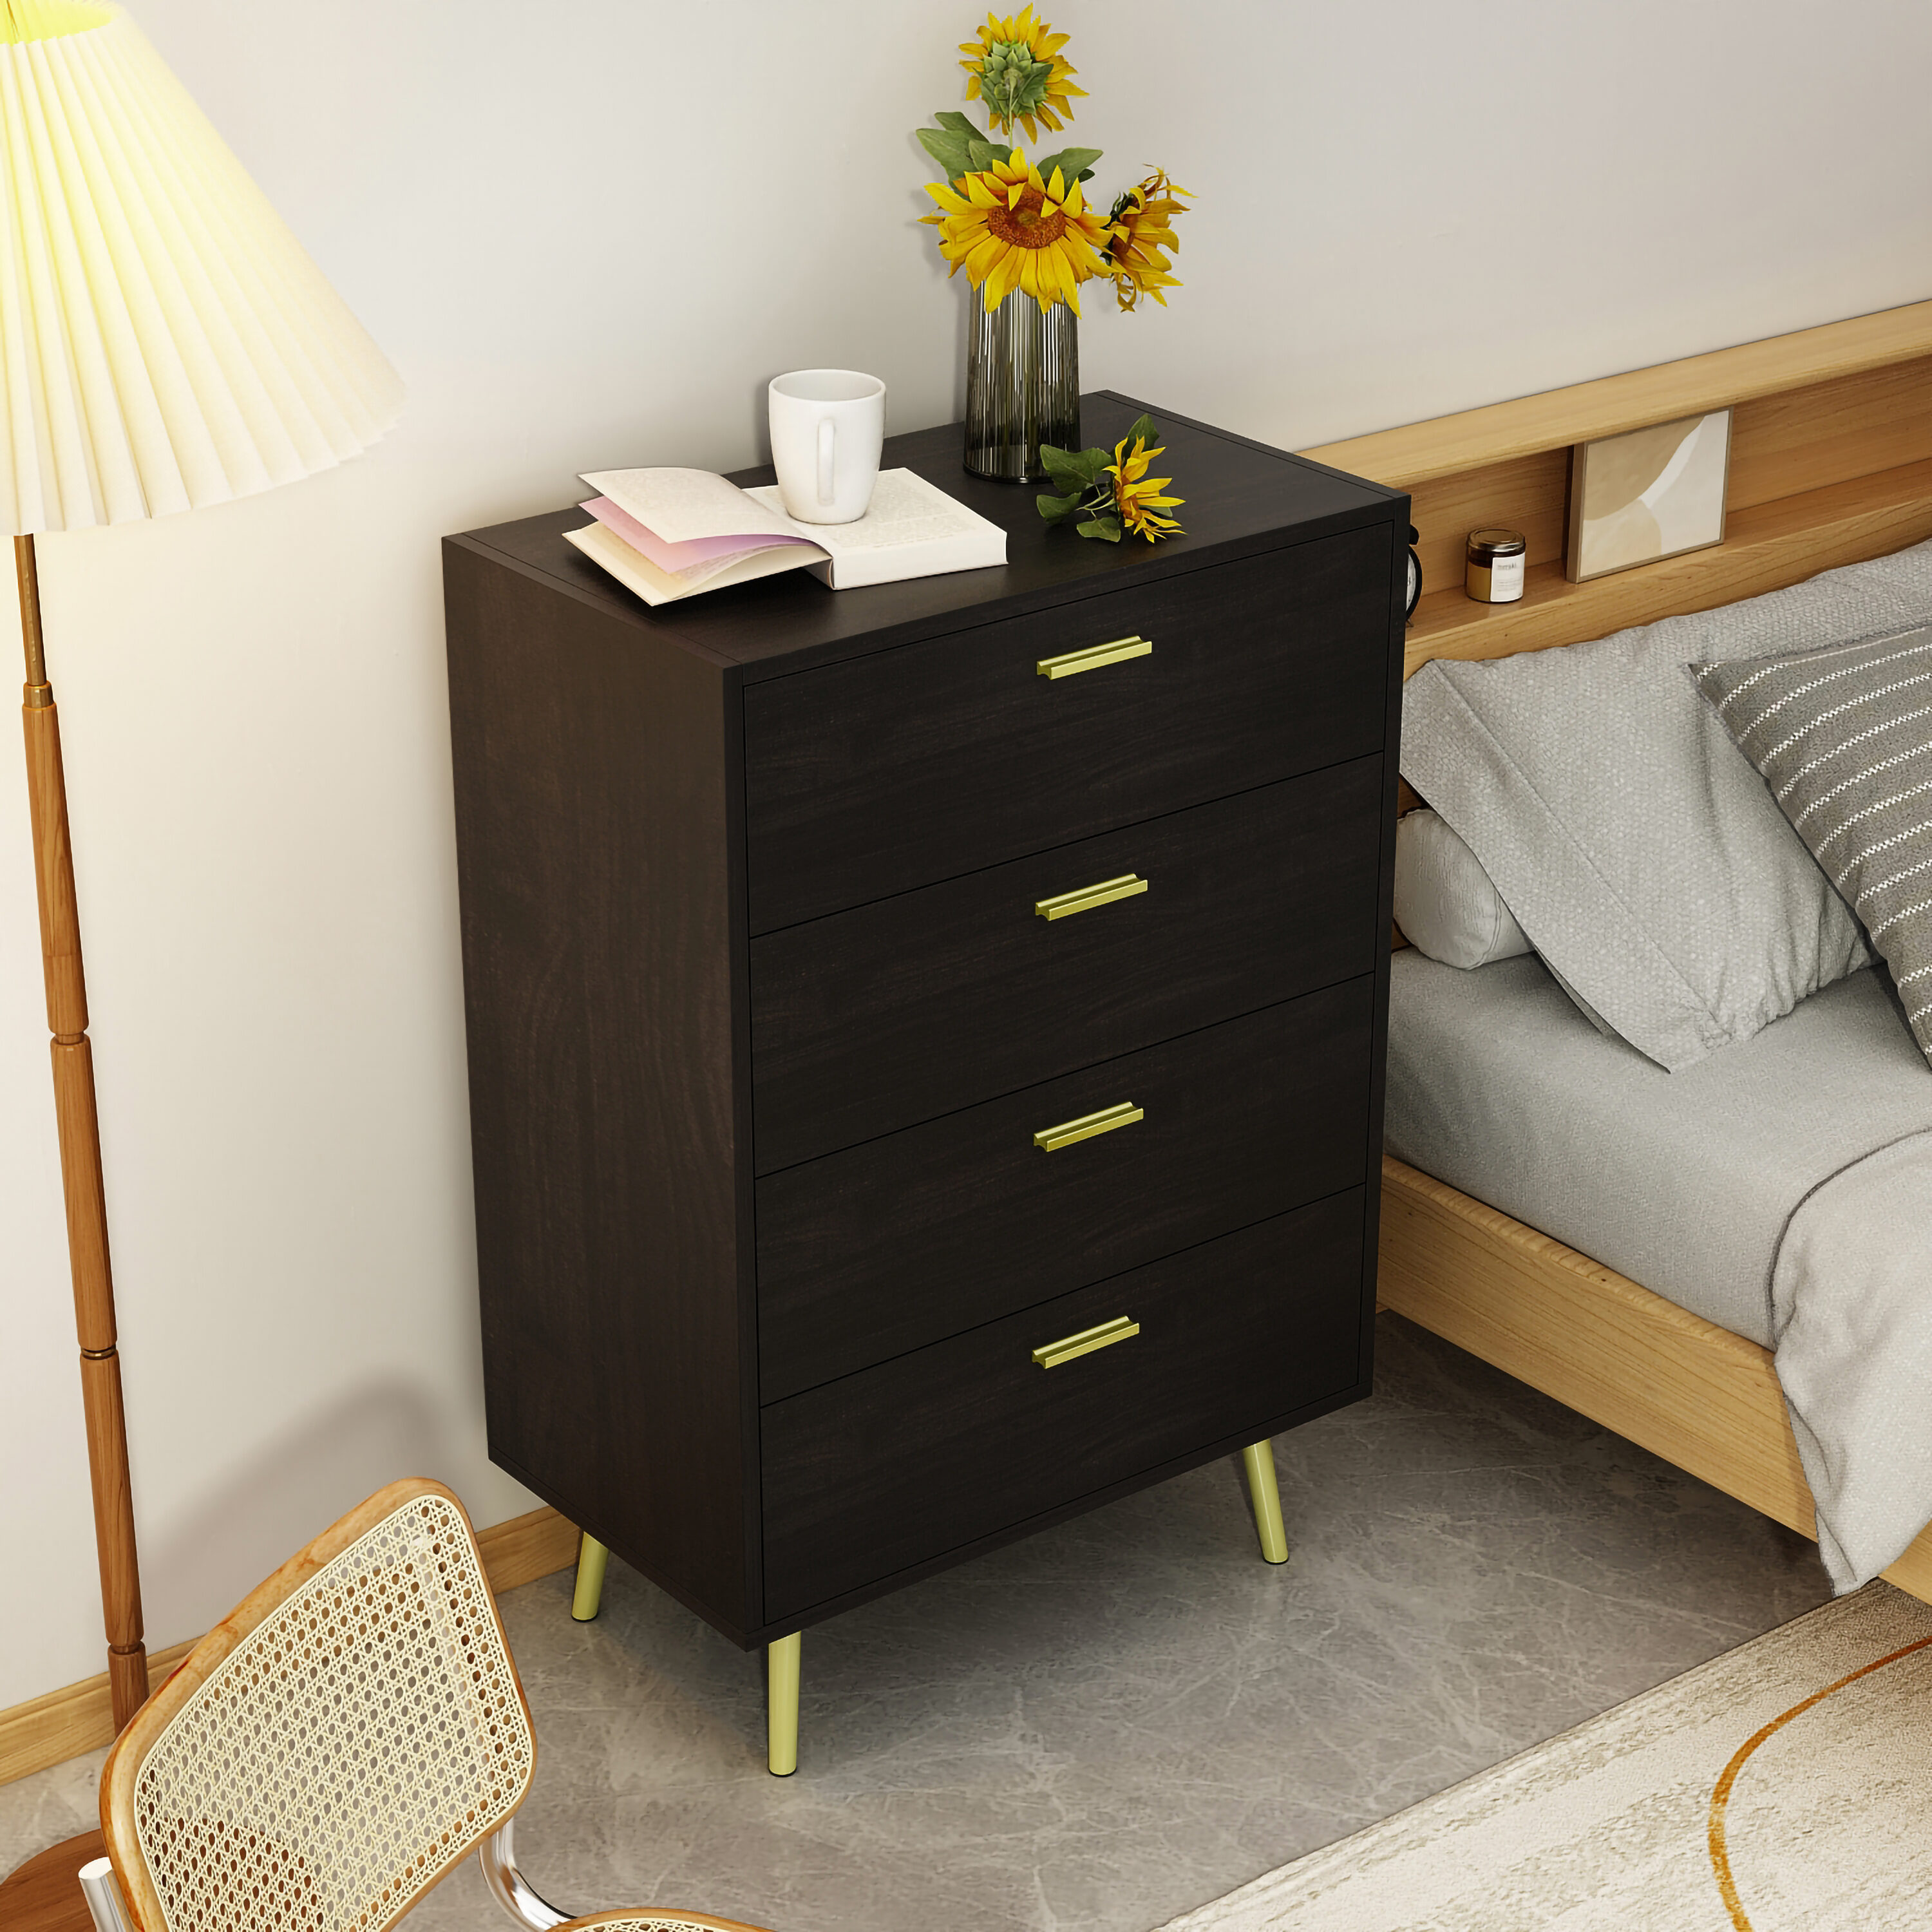 FUFU&GAGA Modern Black Dresser Chest with 4 Large Drawers | Spacious Storage Space | Sturdy Wood Top | Easy Assembly | Contemporary Style -  LJY-WZ0052-01